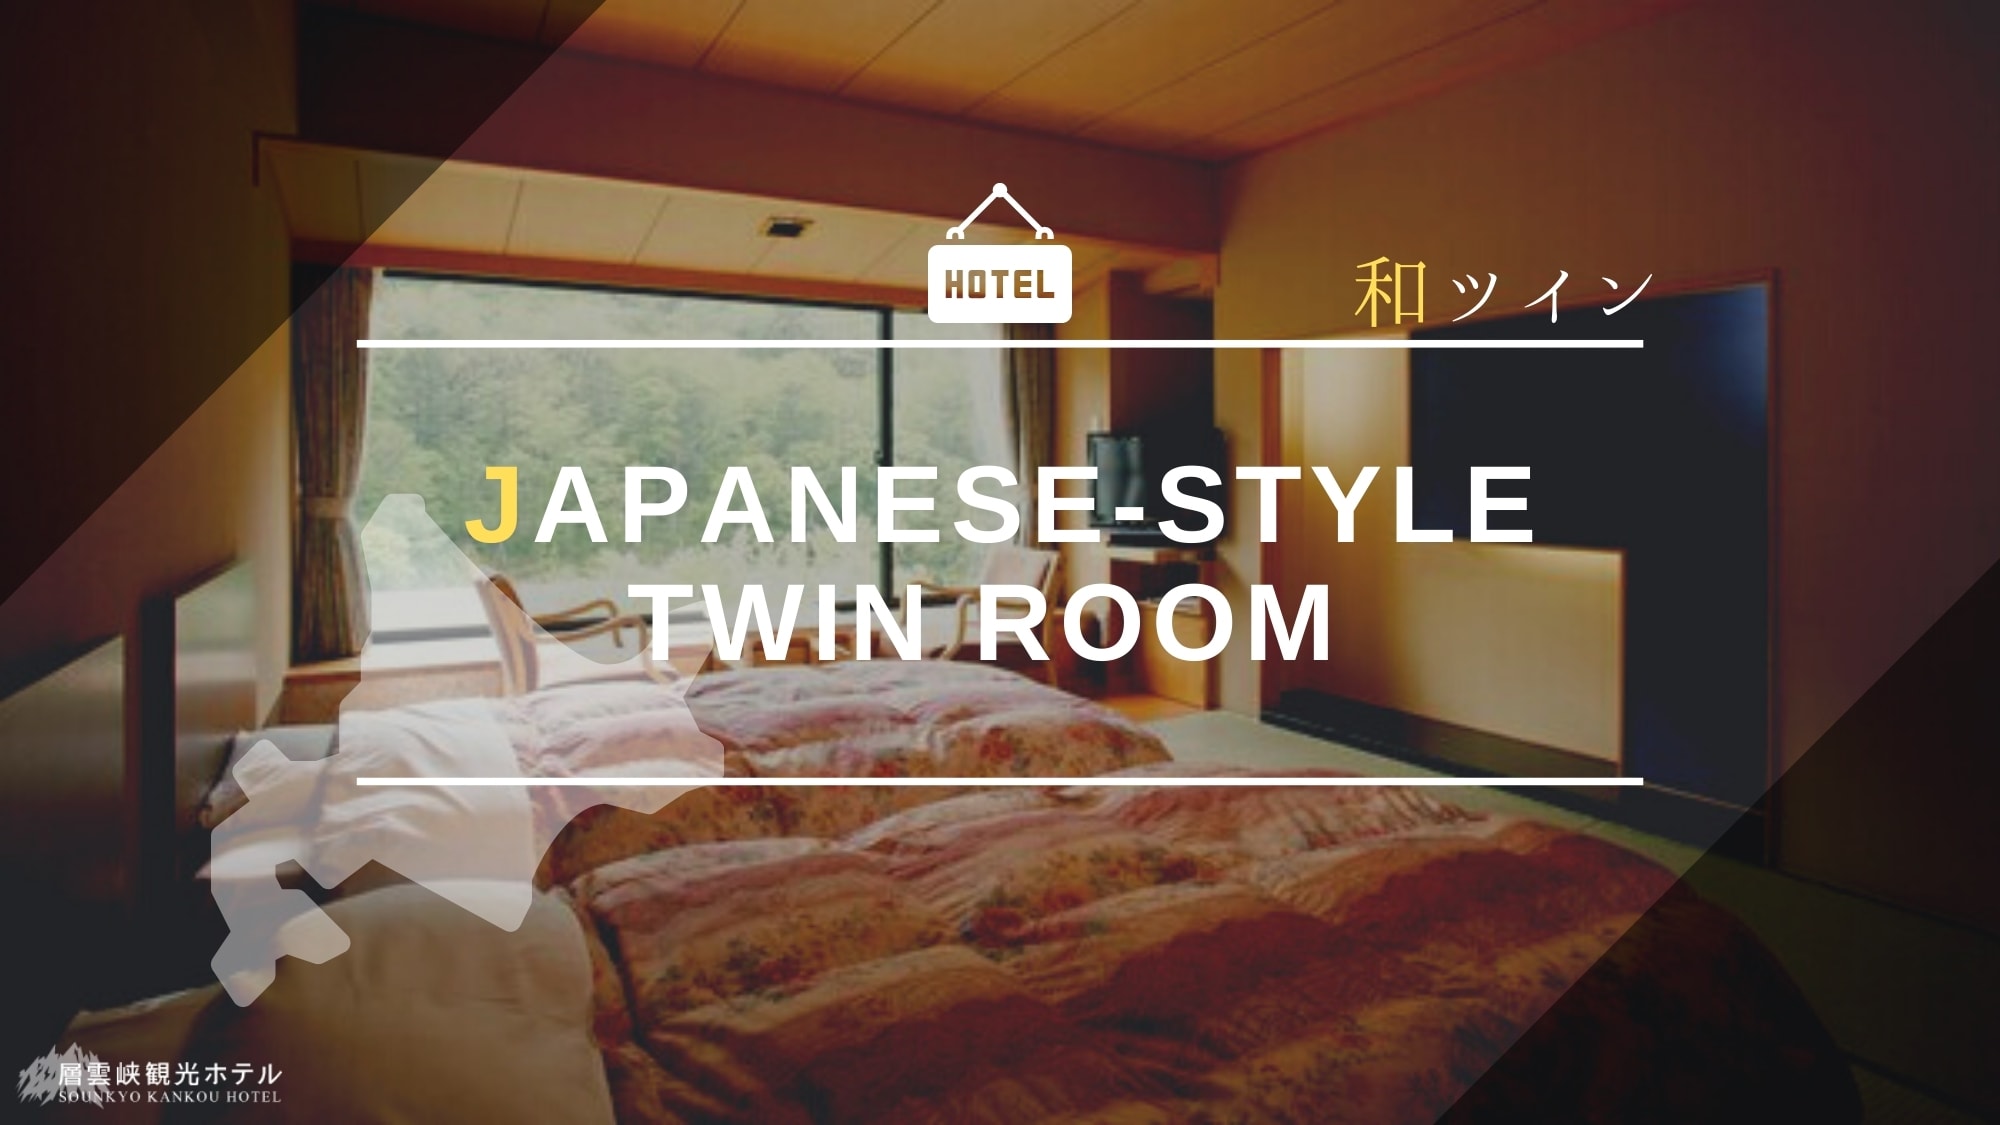 Main building "Japanese style twin room"